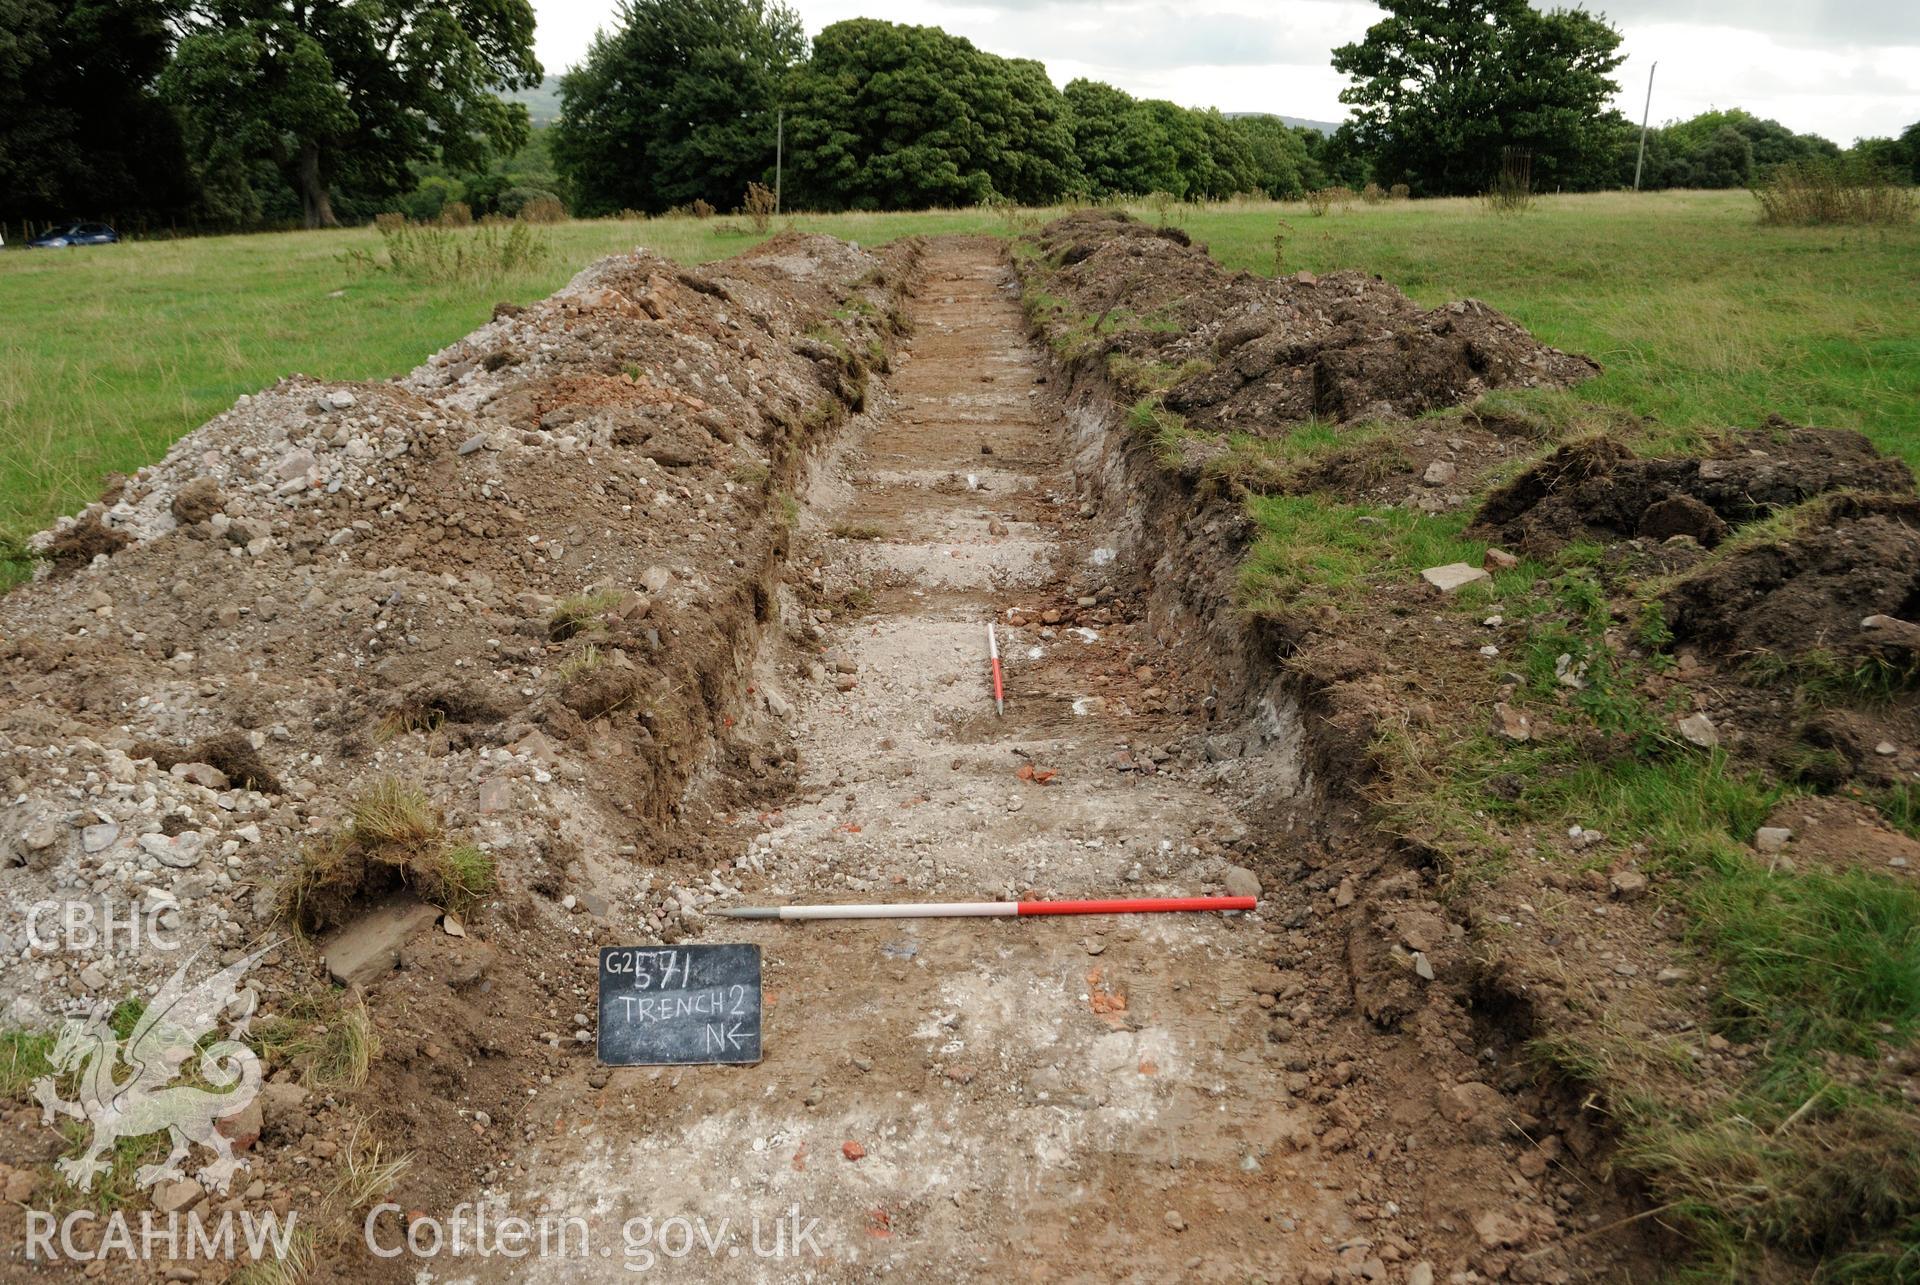 View from the west of Trench 2, post excavation. Photographed during archaeological evaluation of Kinmel Park, Abergele, conducted by Gwynedd Archaeological Trust on 24th August 2018. Project no. 2571.